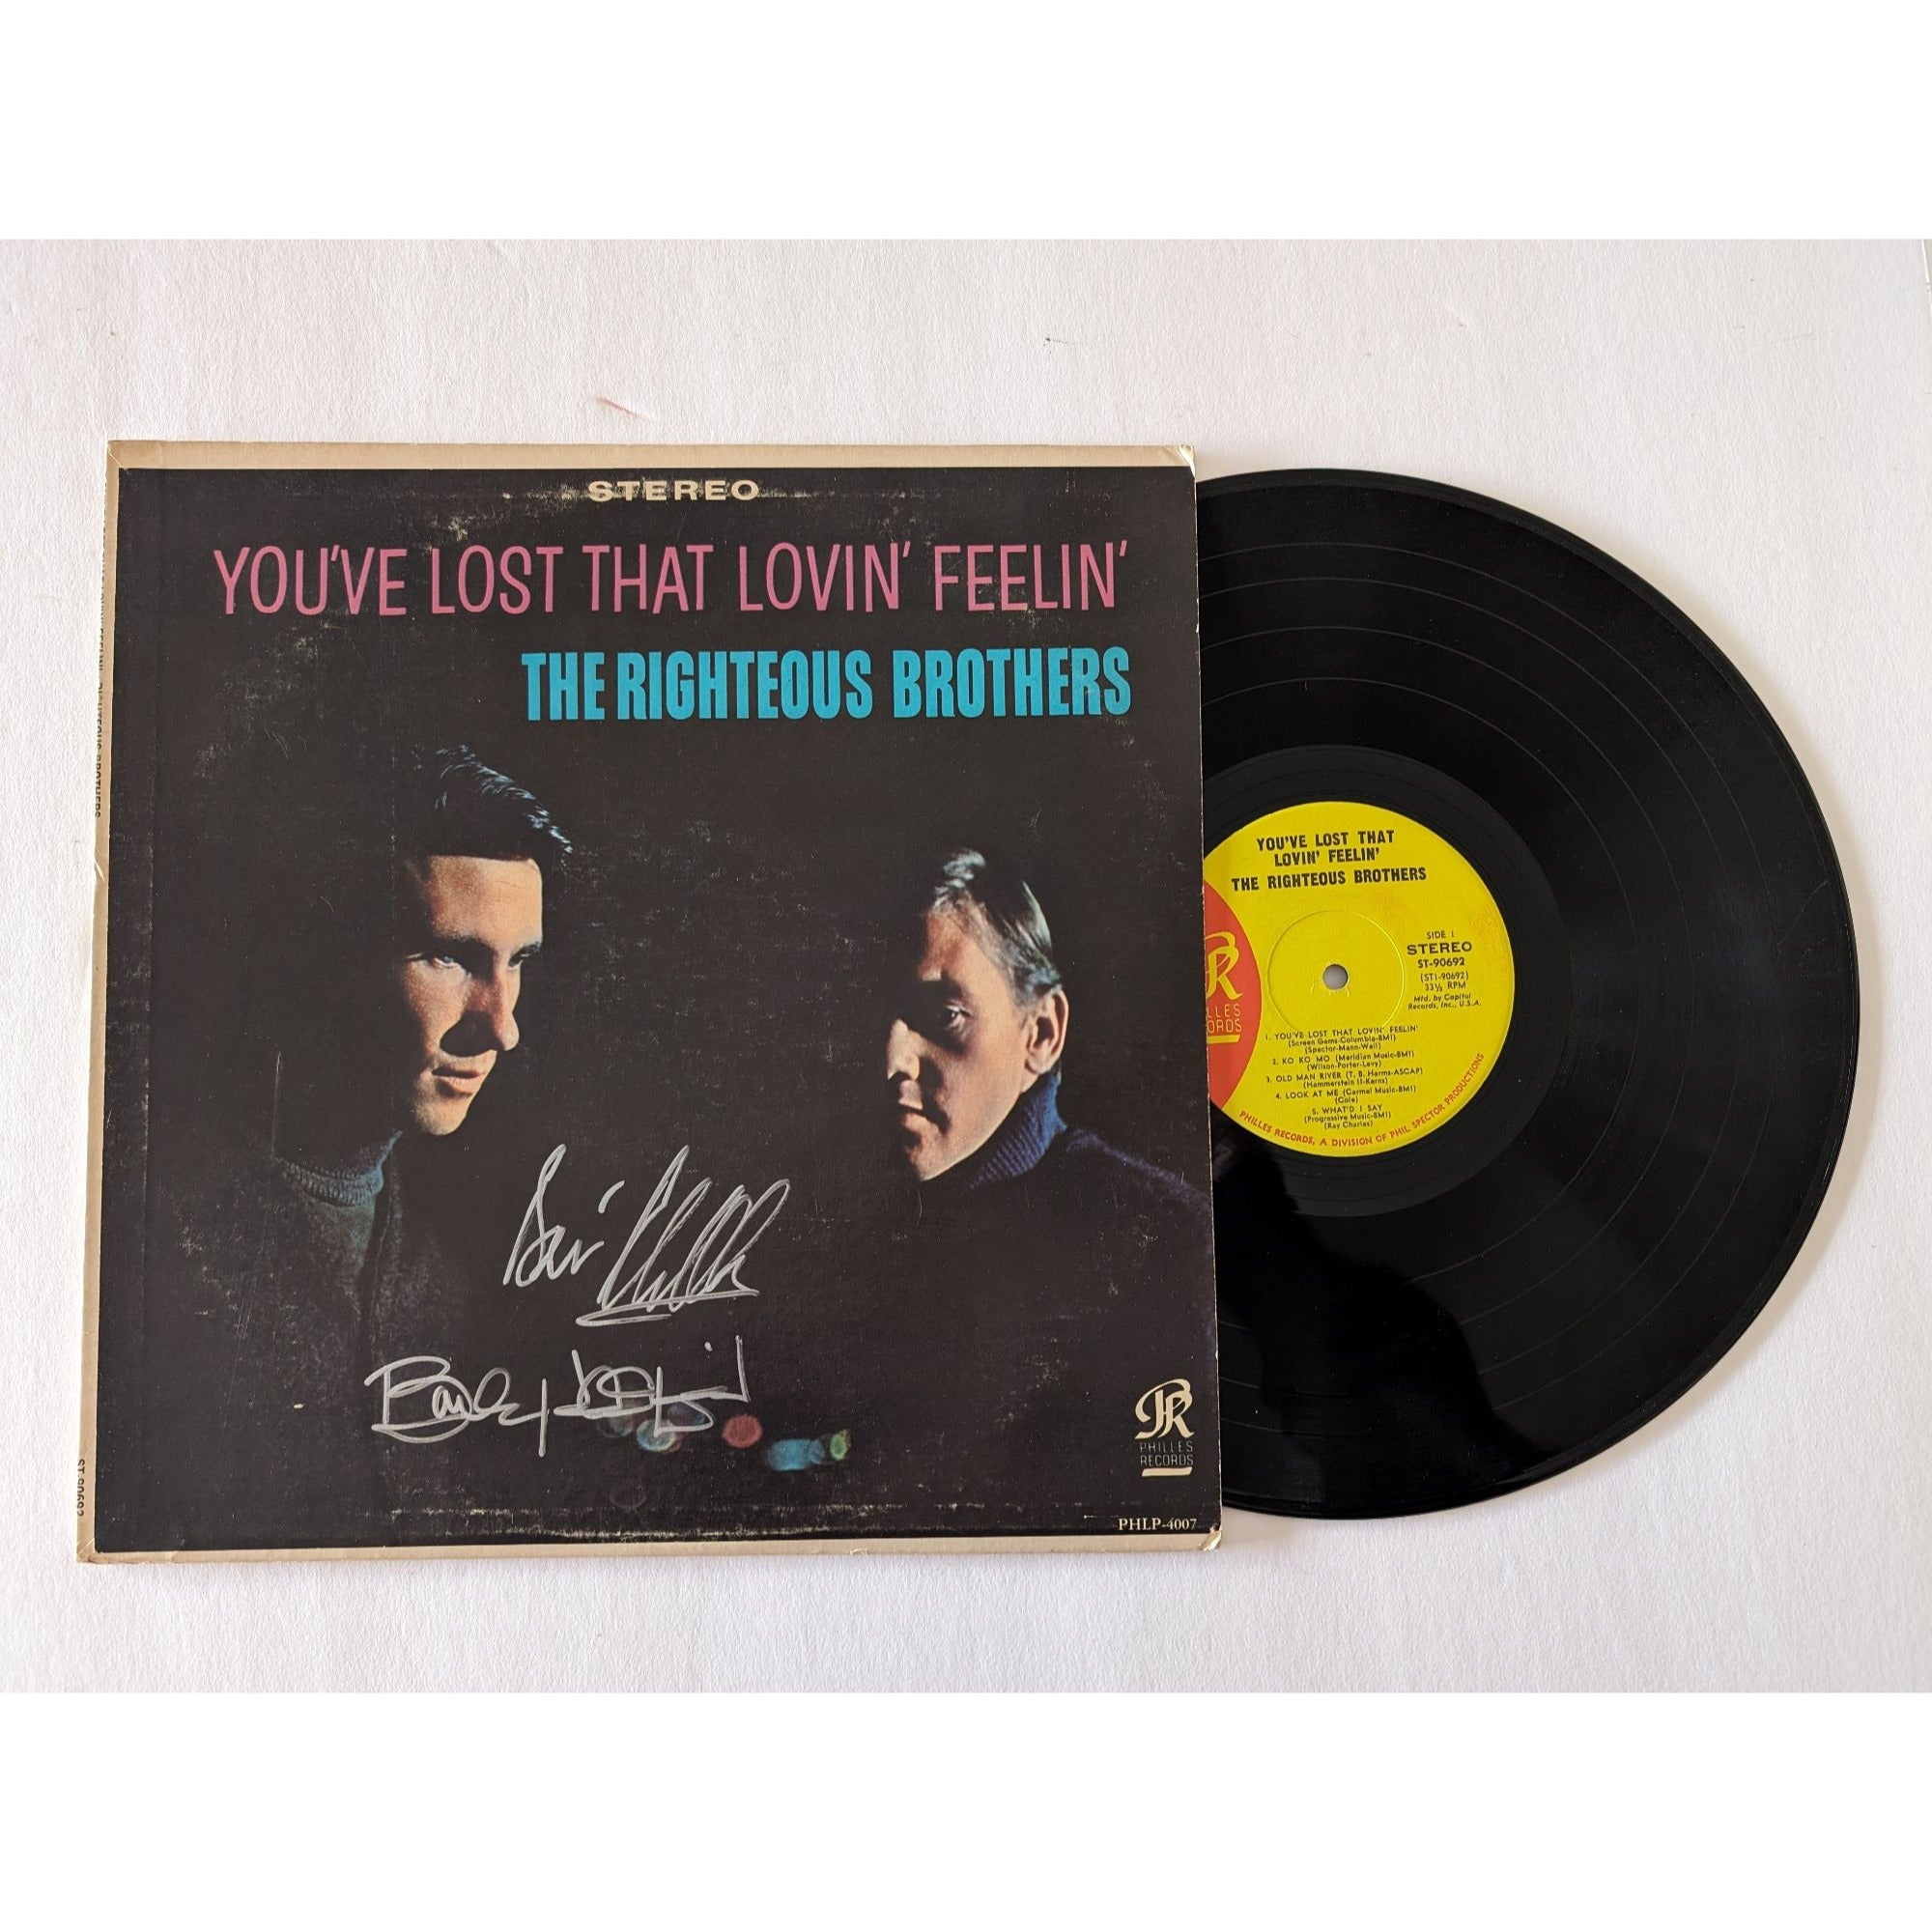 The Righteous Brothers "You Lost That Lovin Feelin" LP  Bill Medley Bobby Hatfield